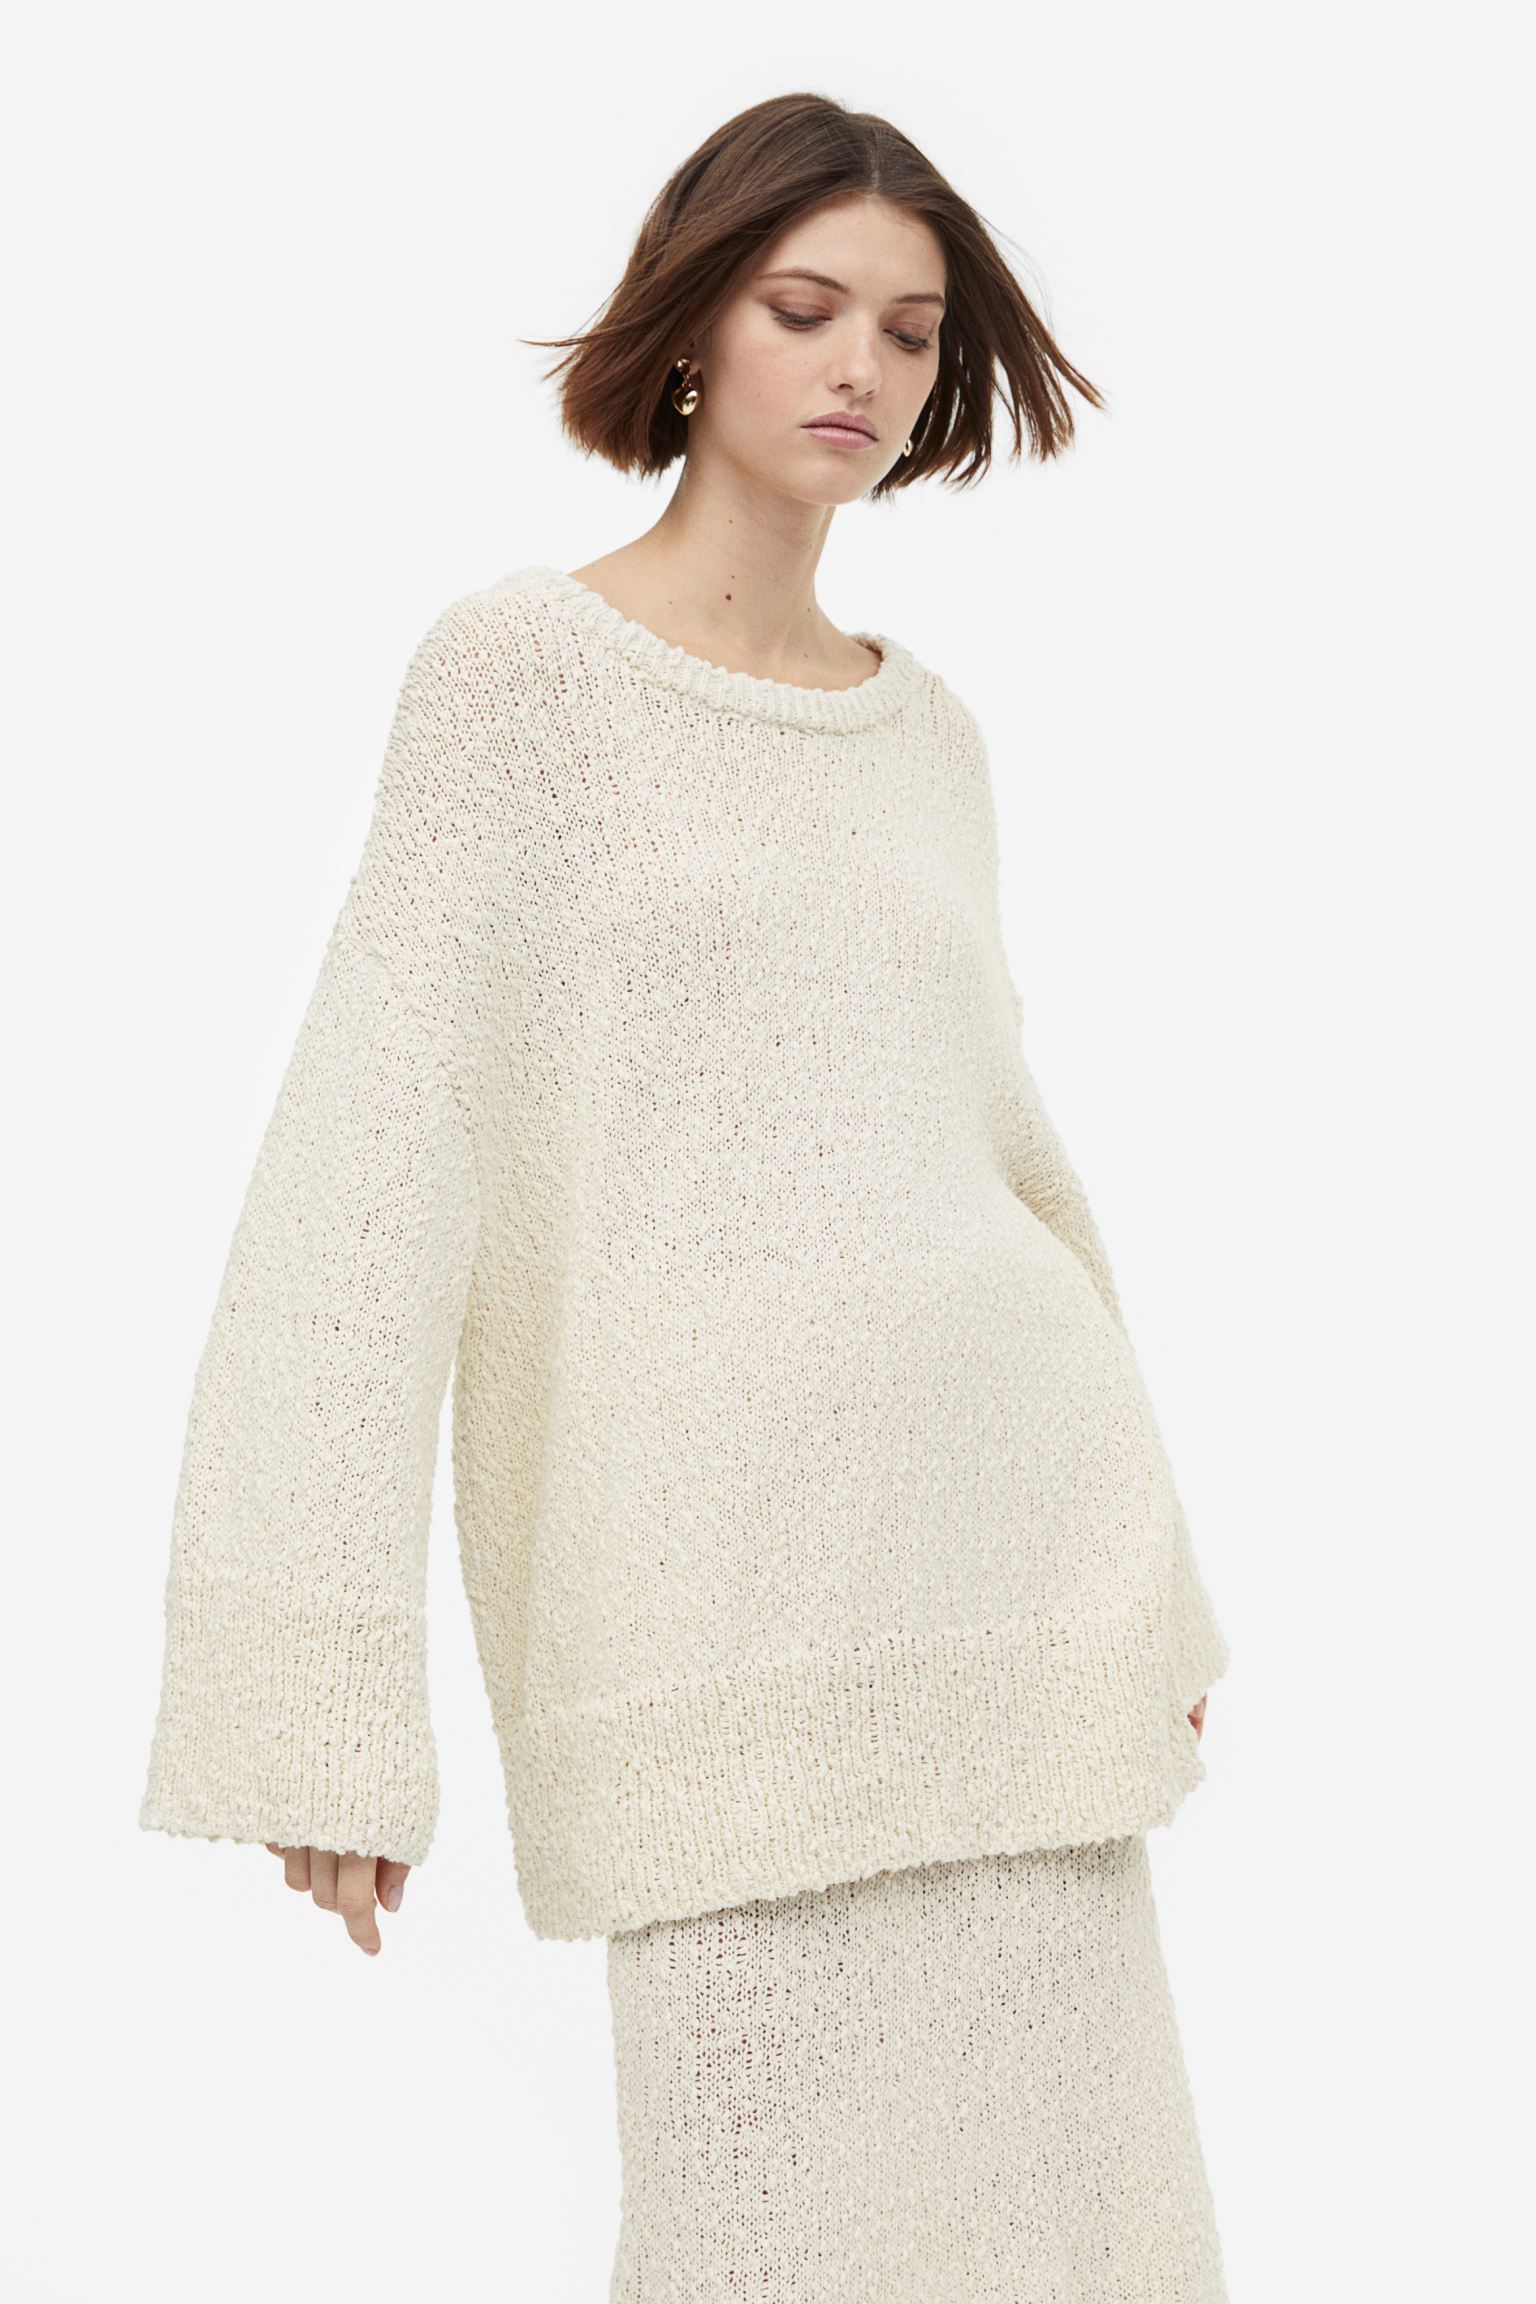 H&M's New Textured Knit Dress Just Won Over Our Editors | Who What Wear UK